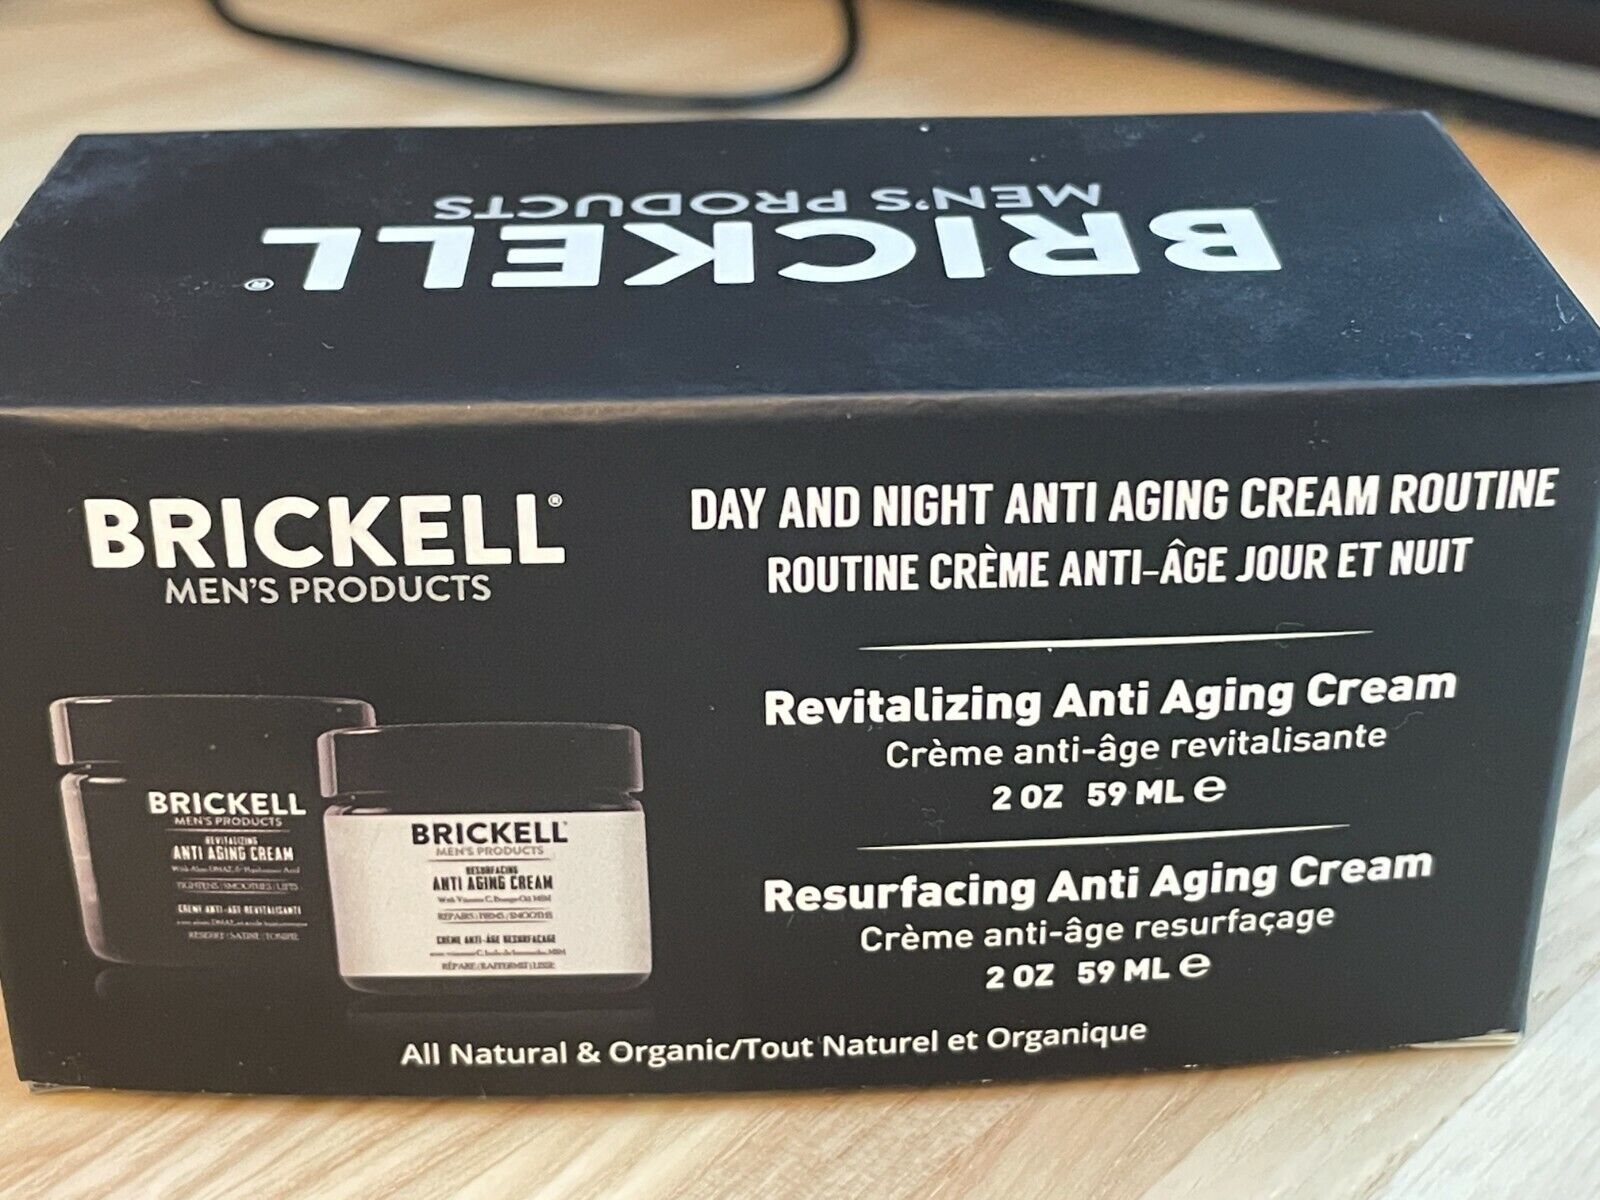 Brickell Day and Night Be super welcome Anti NEW Max 77% OFF Aging Cream - Routine